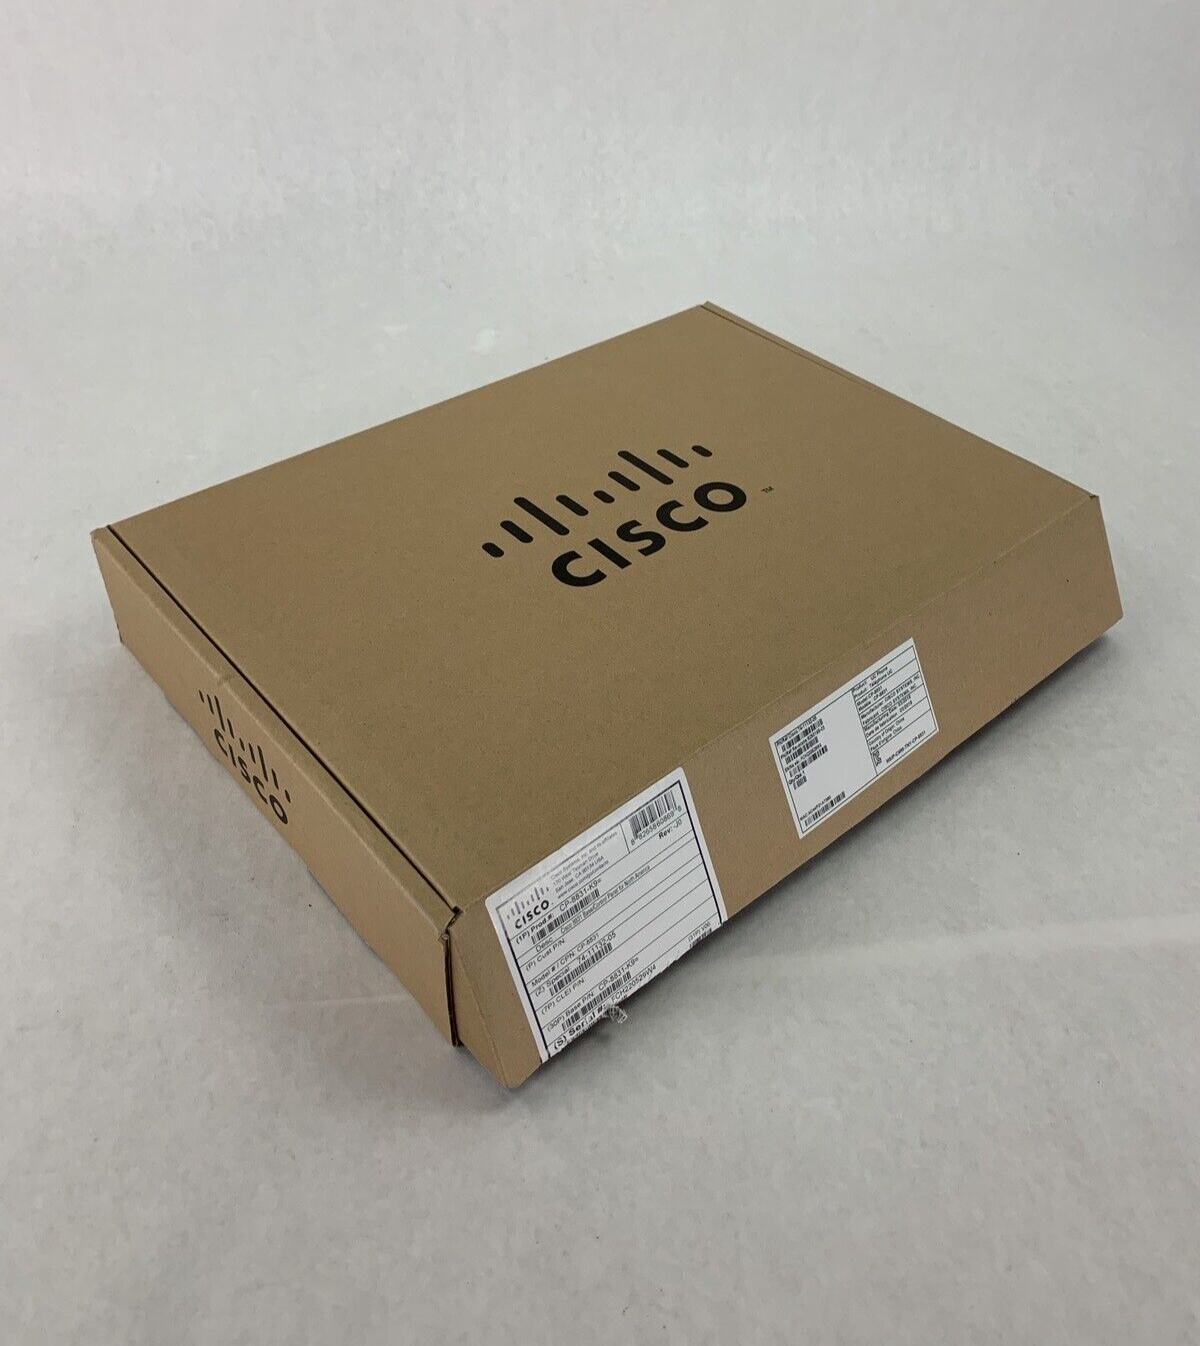 New Box Opened Cisco CP-8831-K9 Unified IP Conference Phone Base & Control Unit